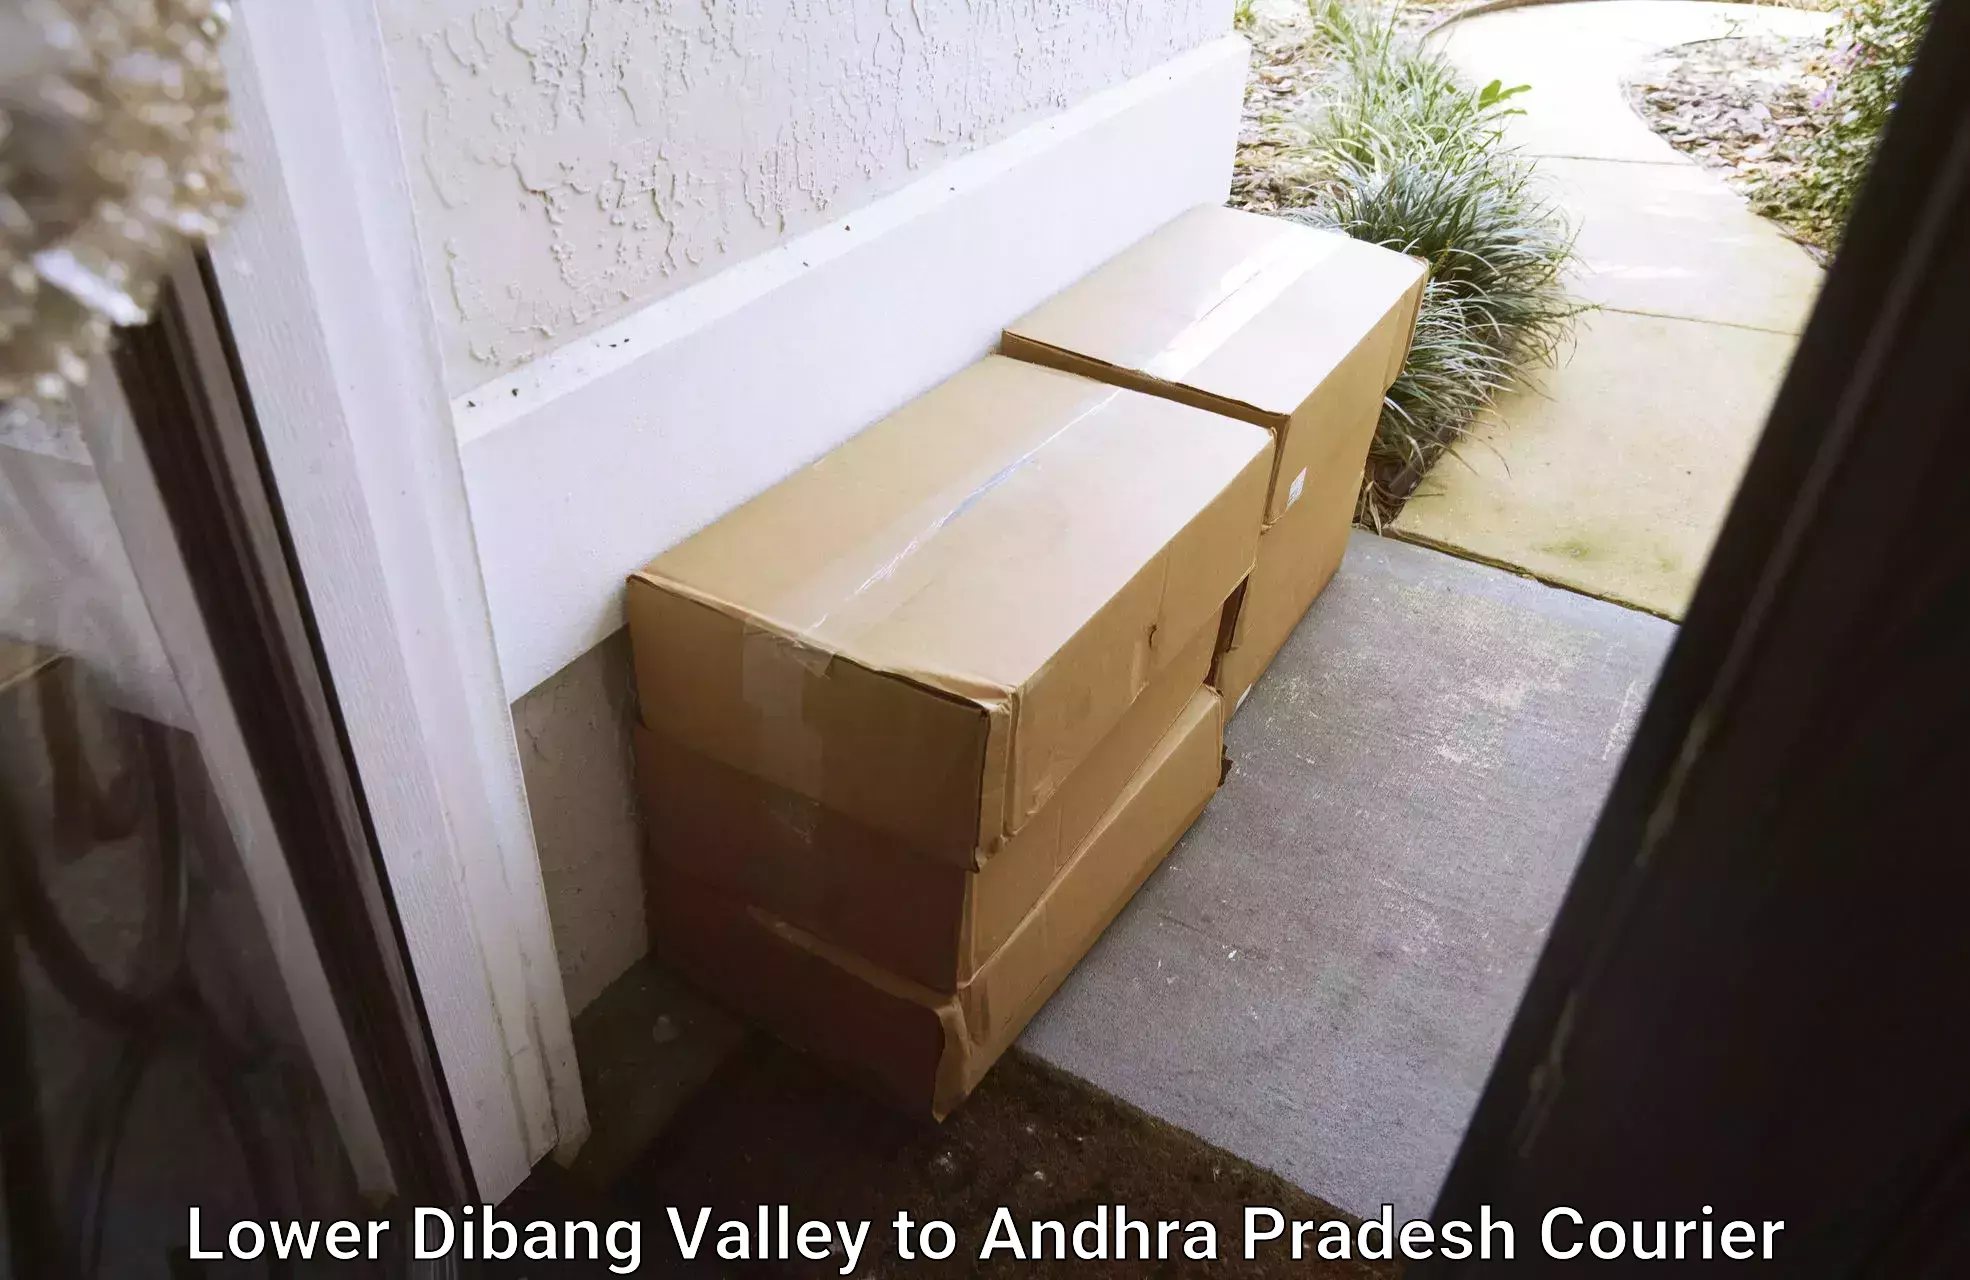 Residential courier service Lower Dibang Valley to Pedabayalu